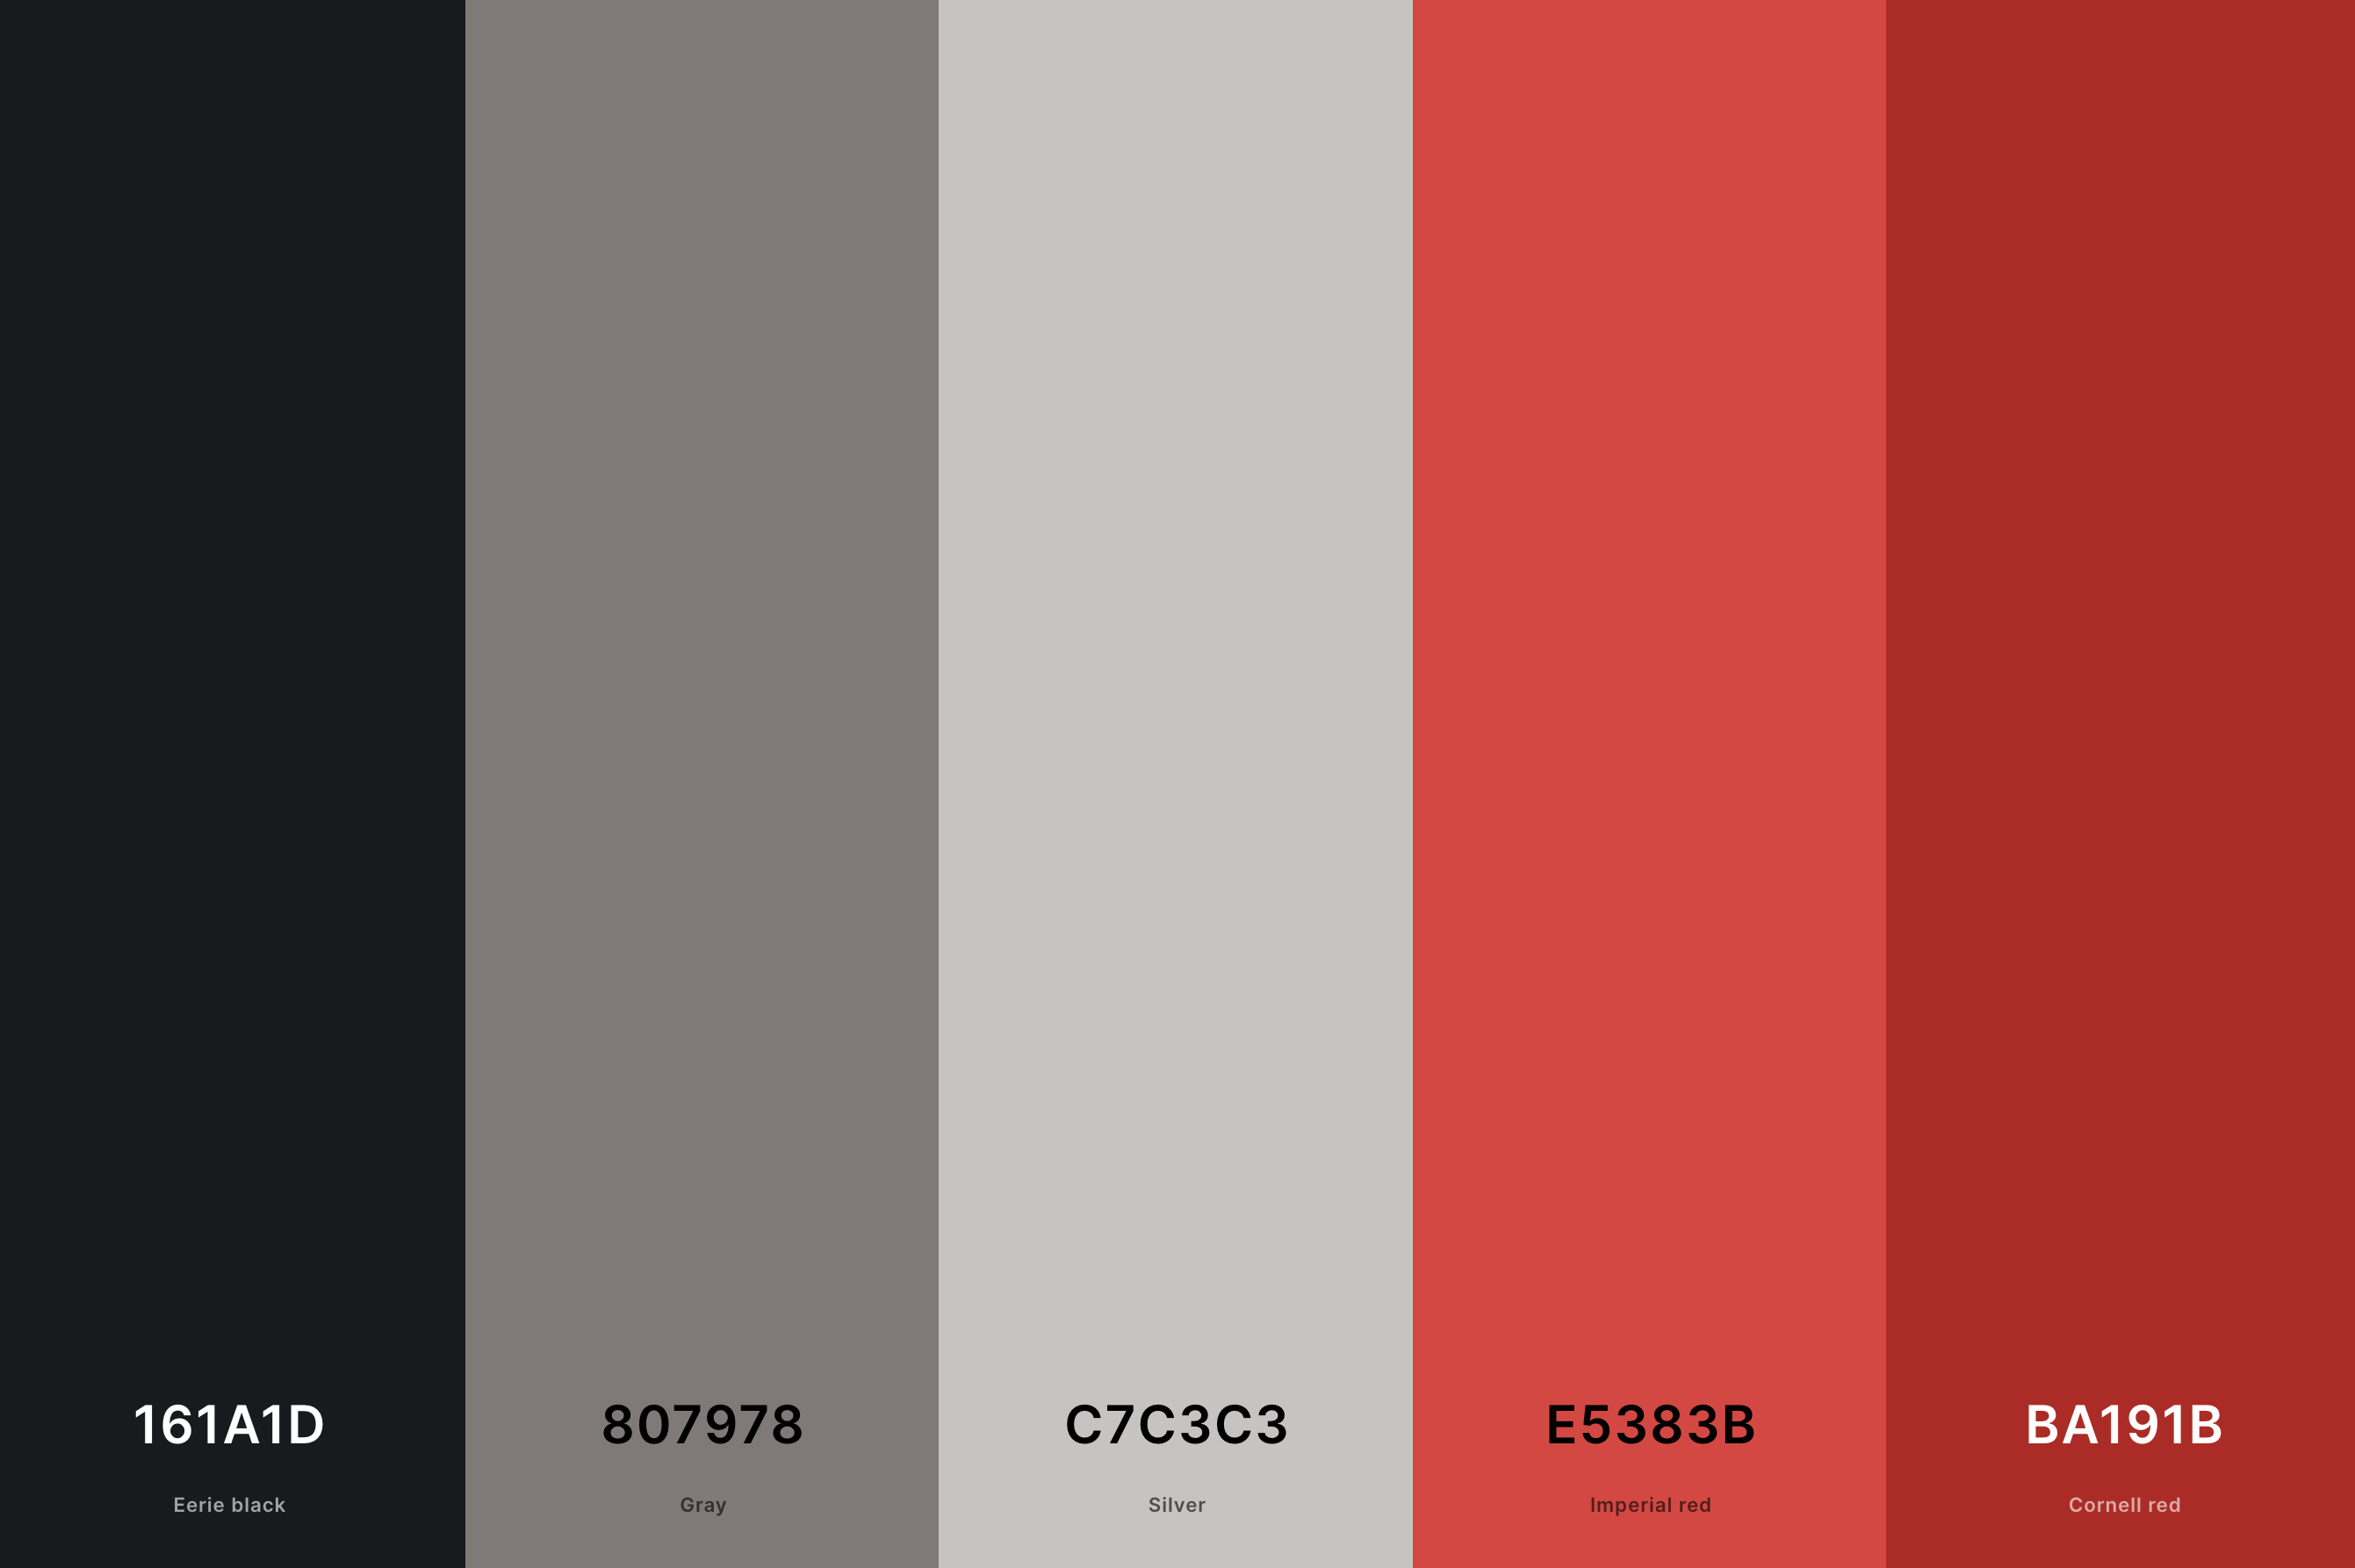 19. Red And Gray Color Palette Color Palette with Eerie Black (Hex #161A1D) + Gray (Hex #807978) + Silver (Hex #C7C3C3) + Imperial Red (Hex #E5383B) + Cornell Red (Hex #BA191B) Color Palette with Hex Codes